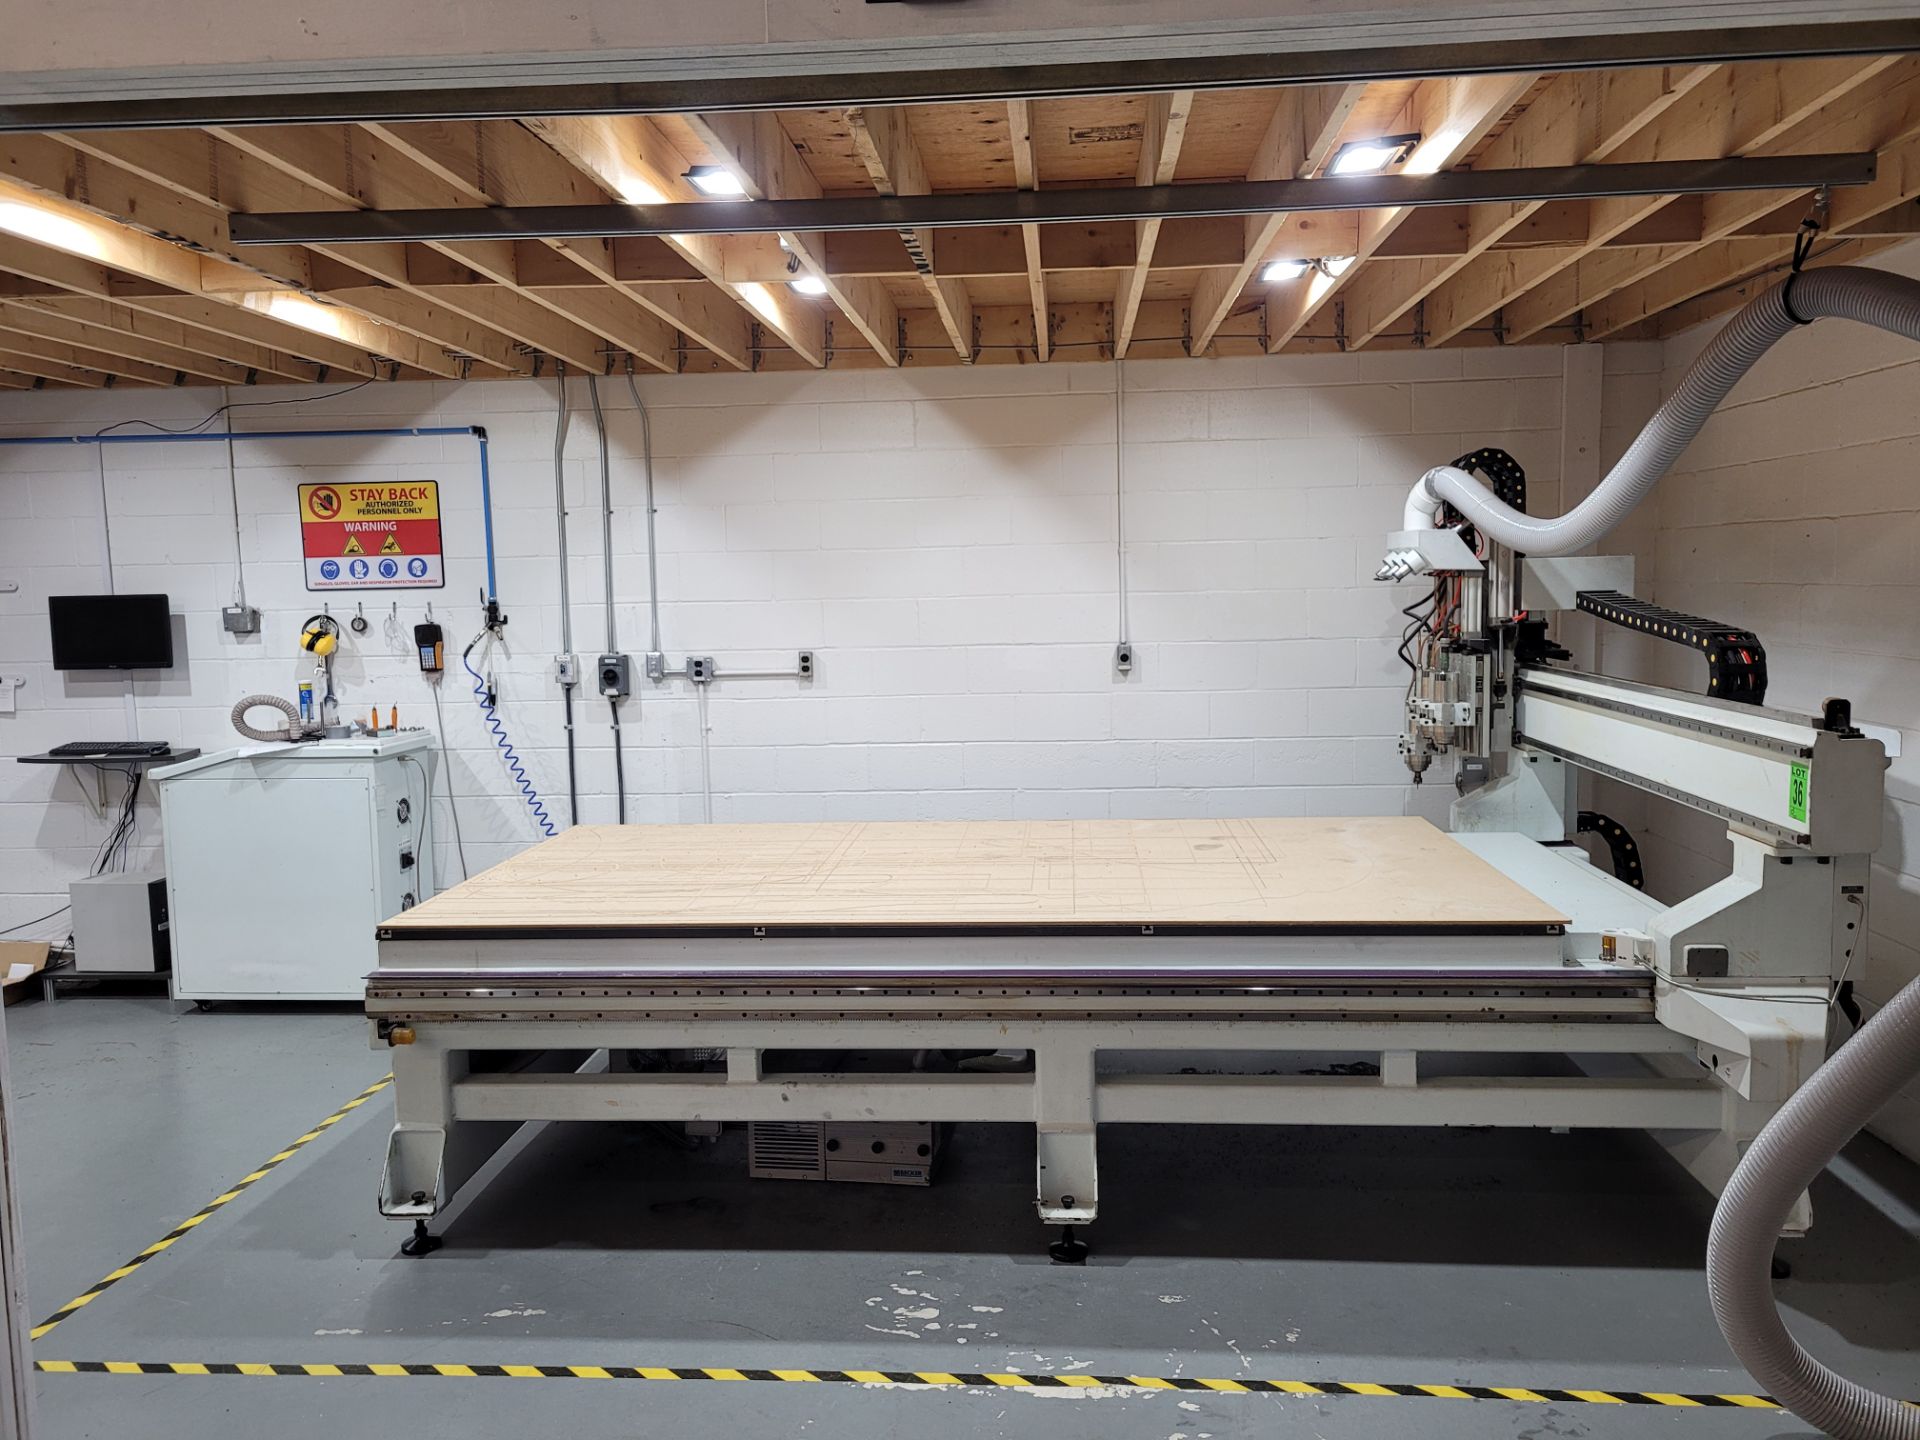 2015 SUDA ATC CNC Router mod. MG1630C, 3-Head System with Accessories and CRAFTEX mod. FM-300 Collec - Image 2 of 51